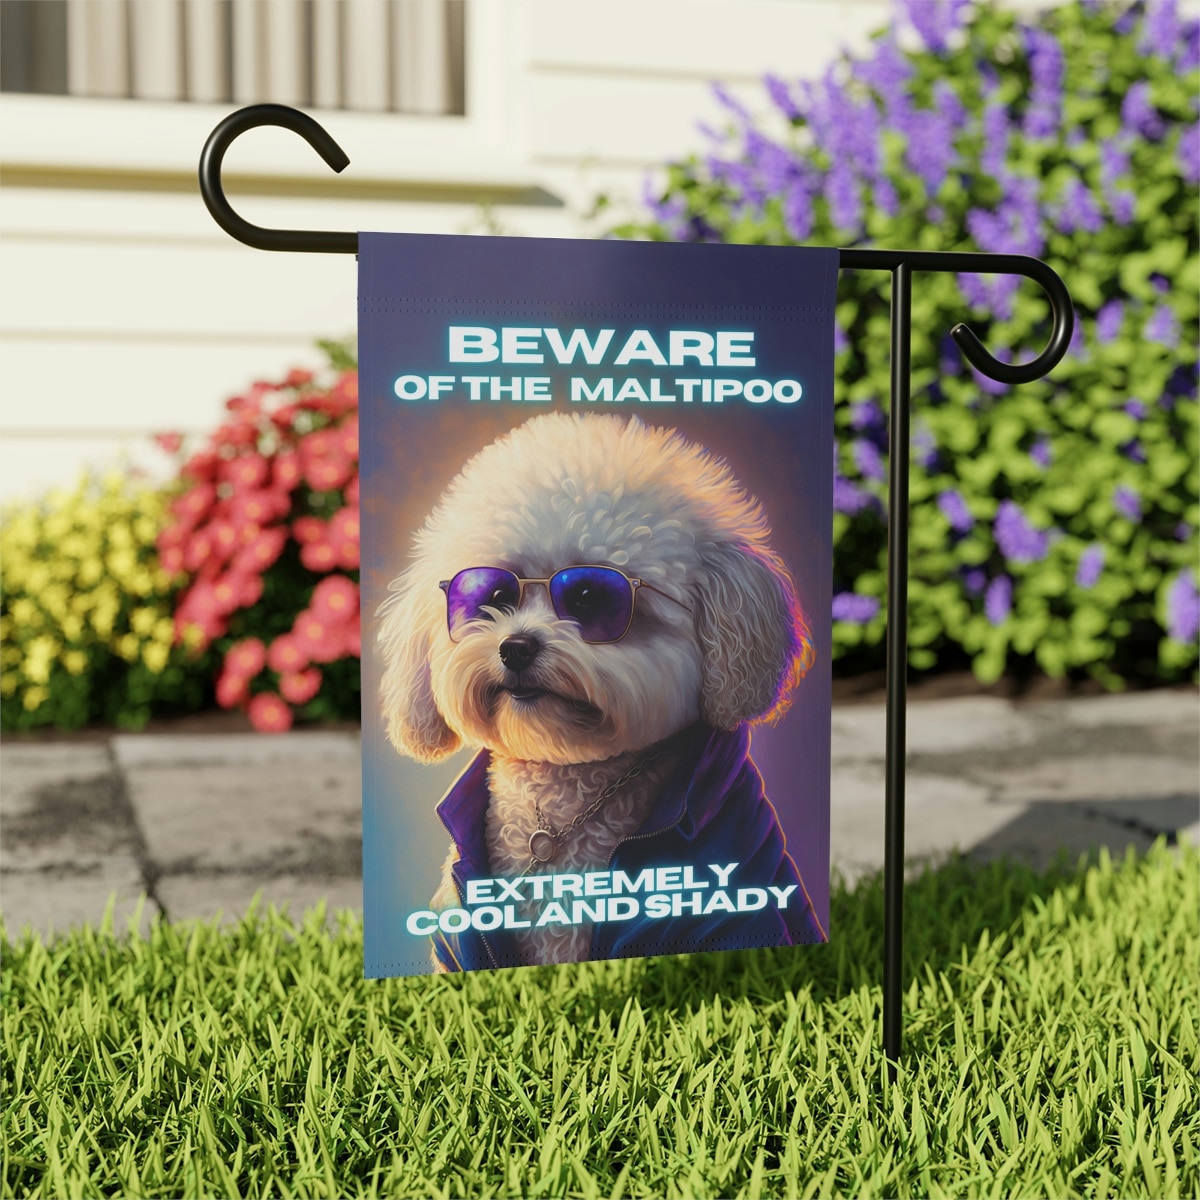 Beware of Maltipoo - Banner For Your Yard A colorful photo of a dog wearing glasses, with the text "Beware of the Maltipoo, extremely cool and shady" written in bold letters.